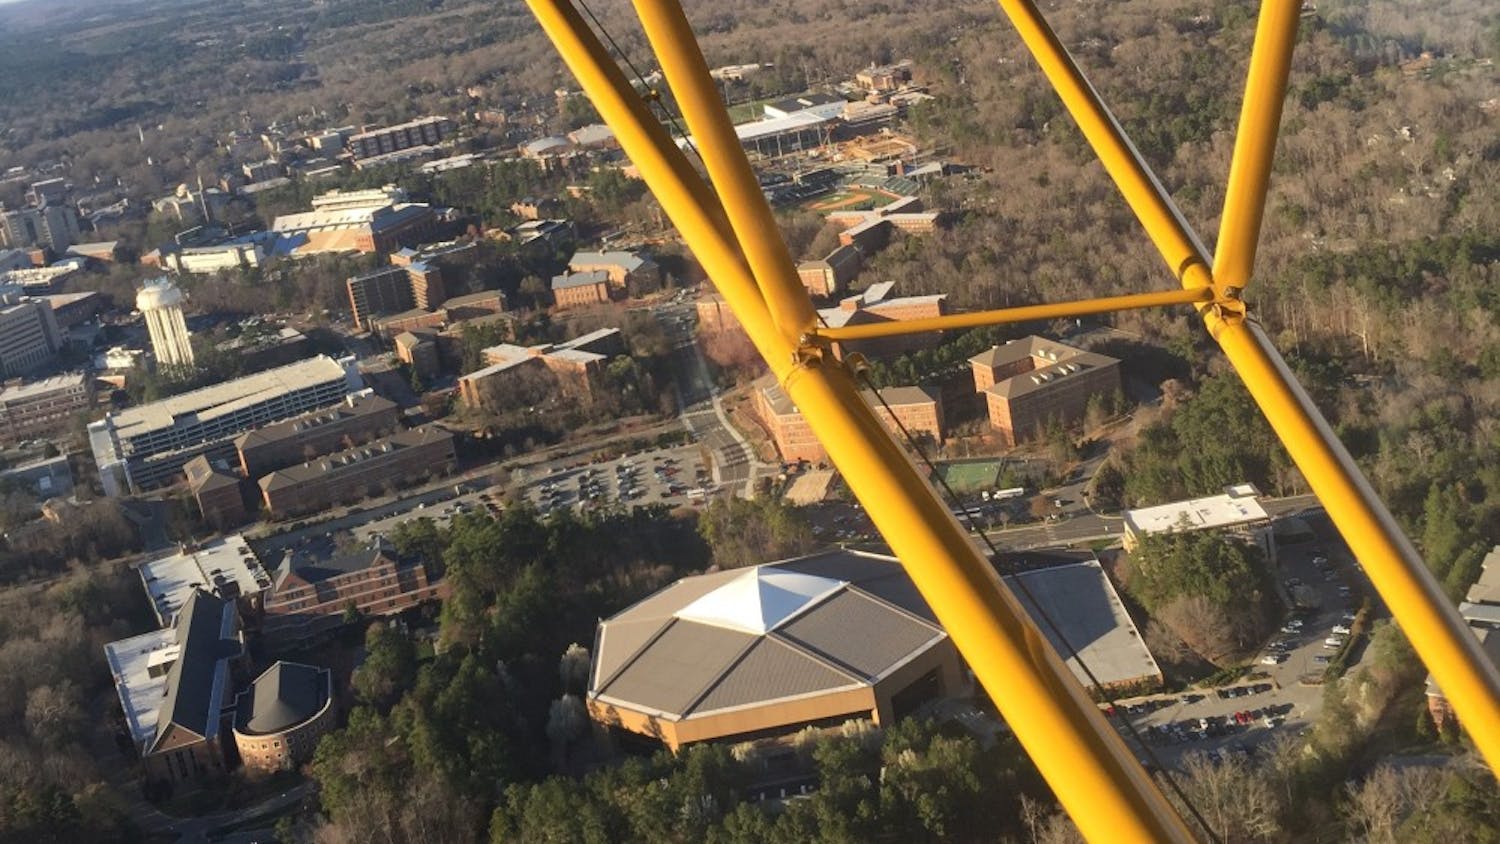 A view of the Dean Dome and South Campus is seen from the Piper Cub.